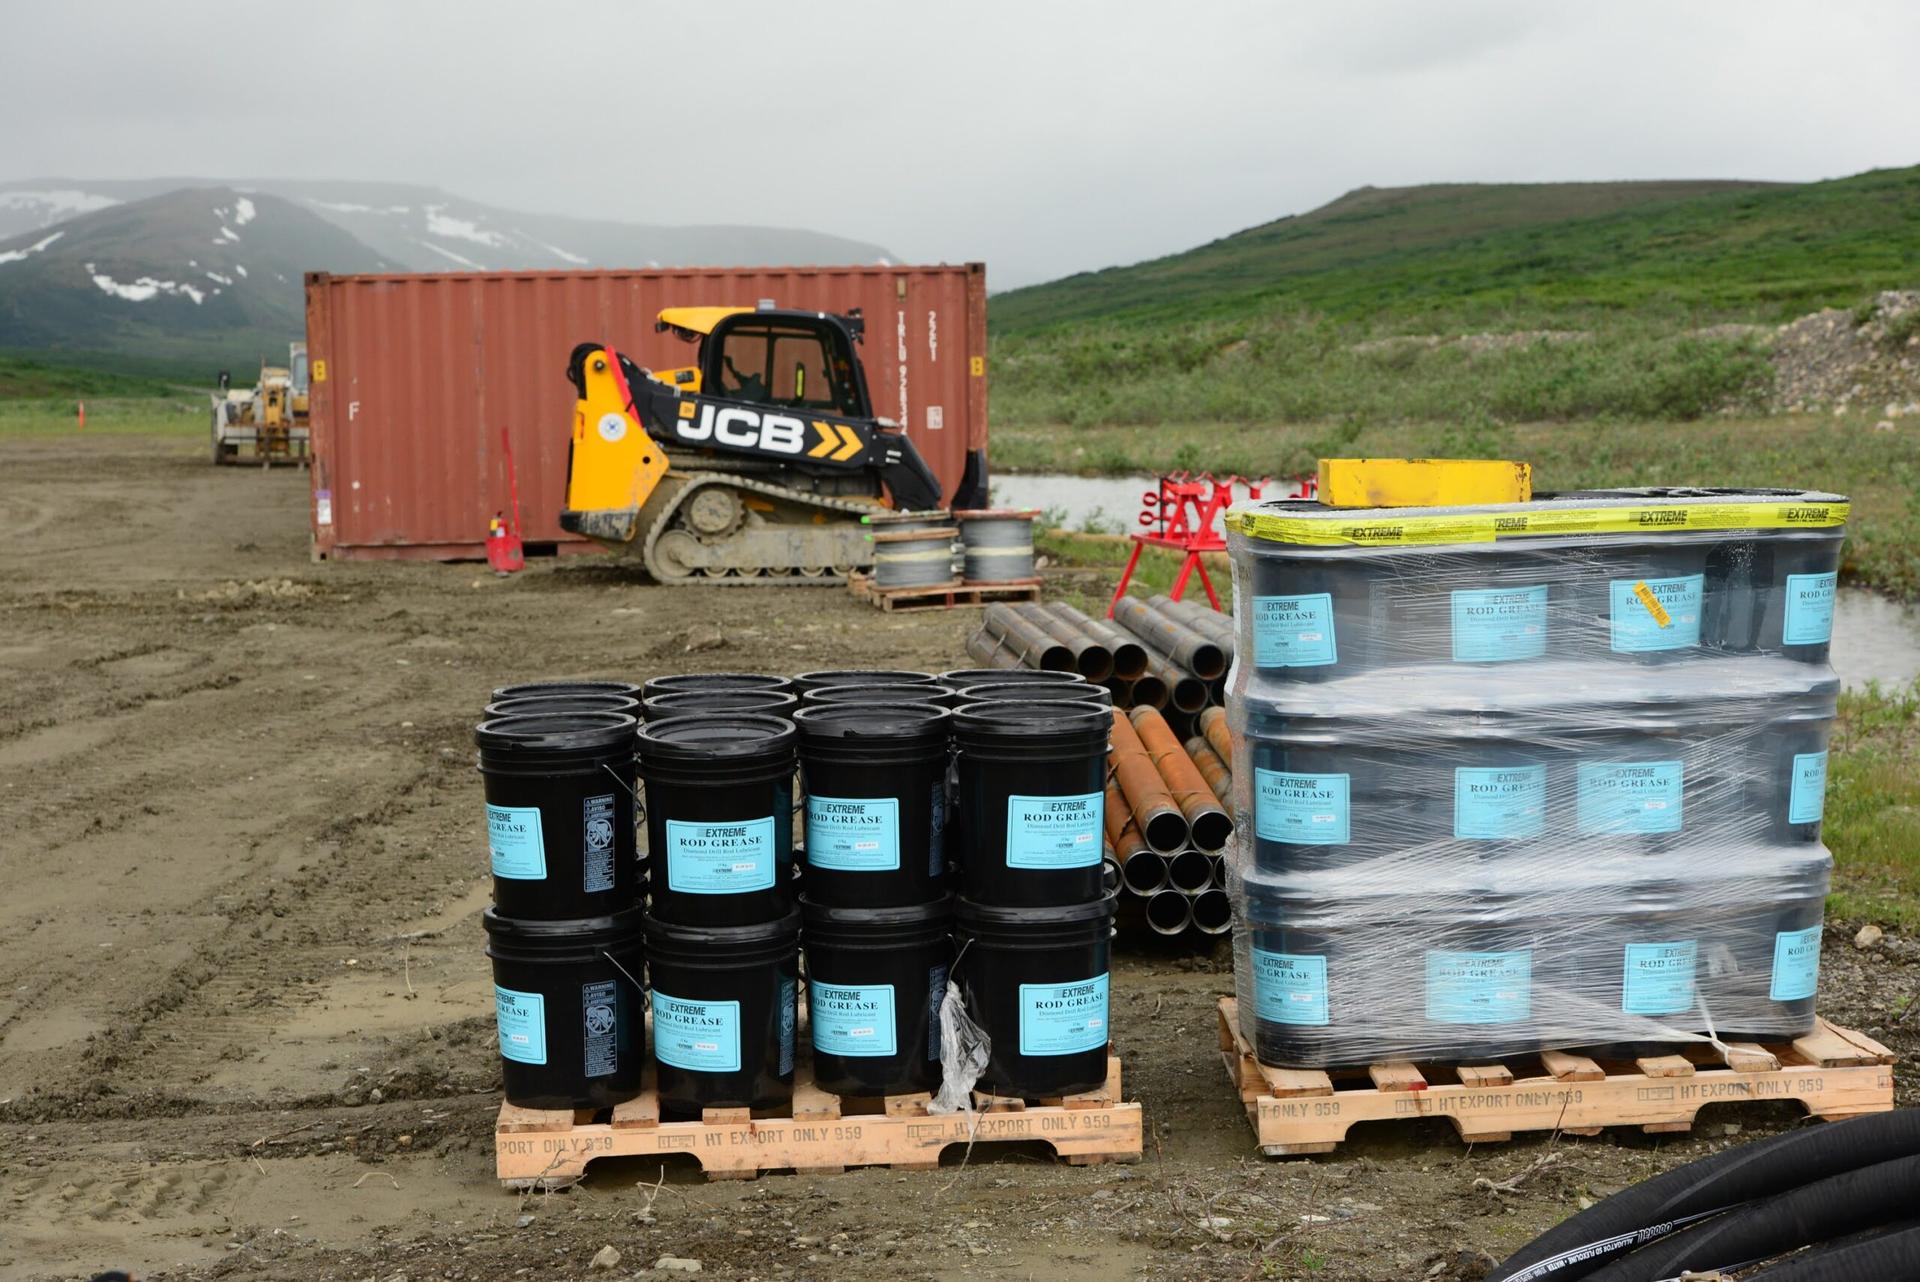 Supplies for Graphite One’s remote mining exploration camp wait at a staging area the company uses for its helicopters.